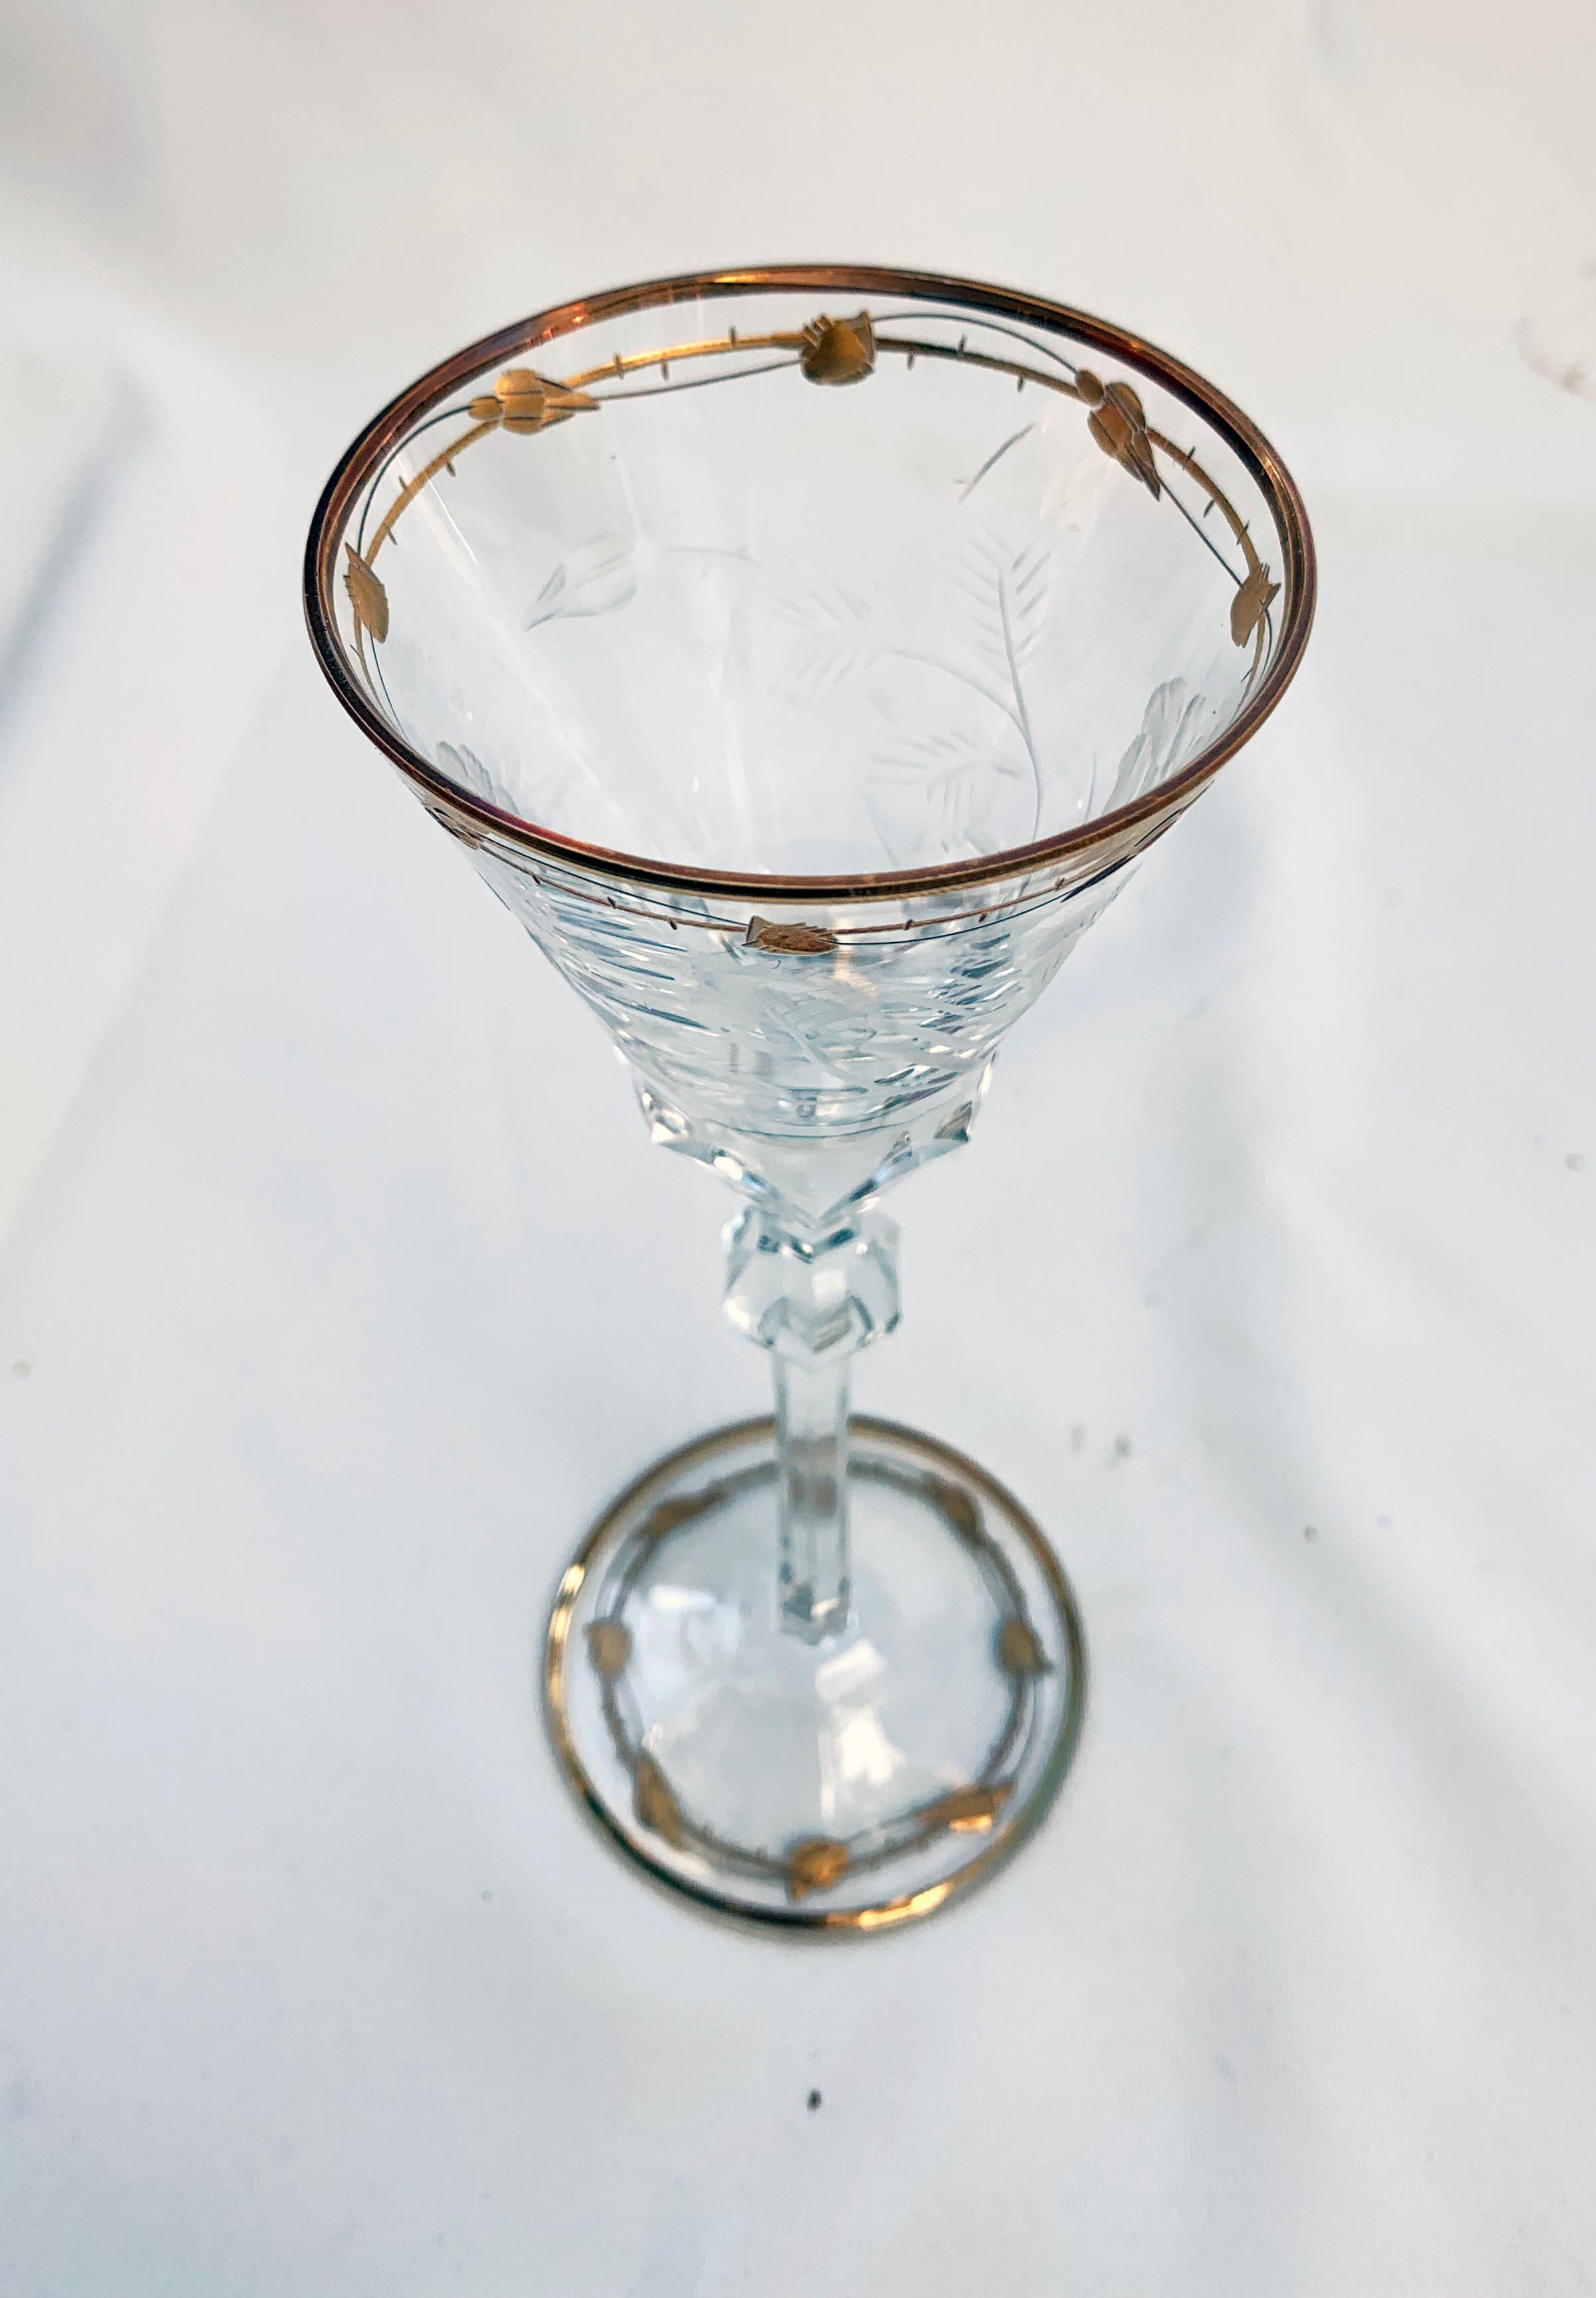 Crystal Wine Glass Moser Art Nouveau Hand Blown, Engraved, Gilded Rose 'Paula' by Moser